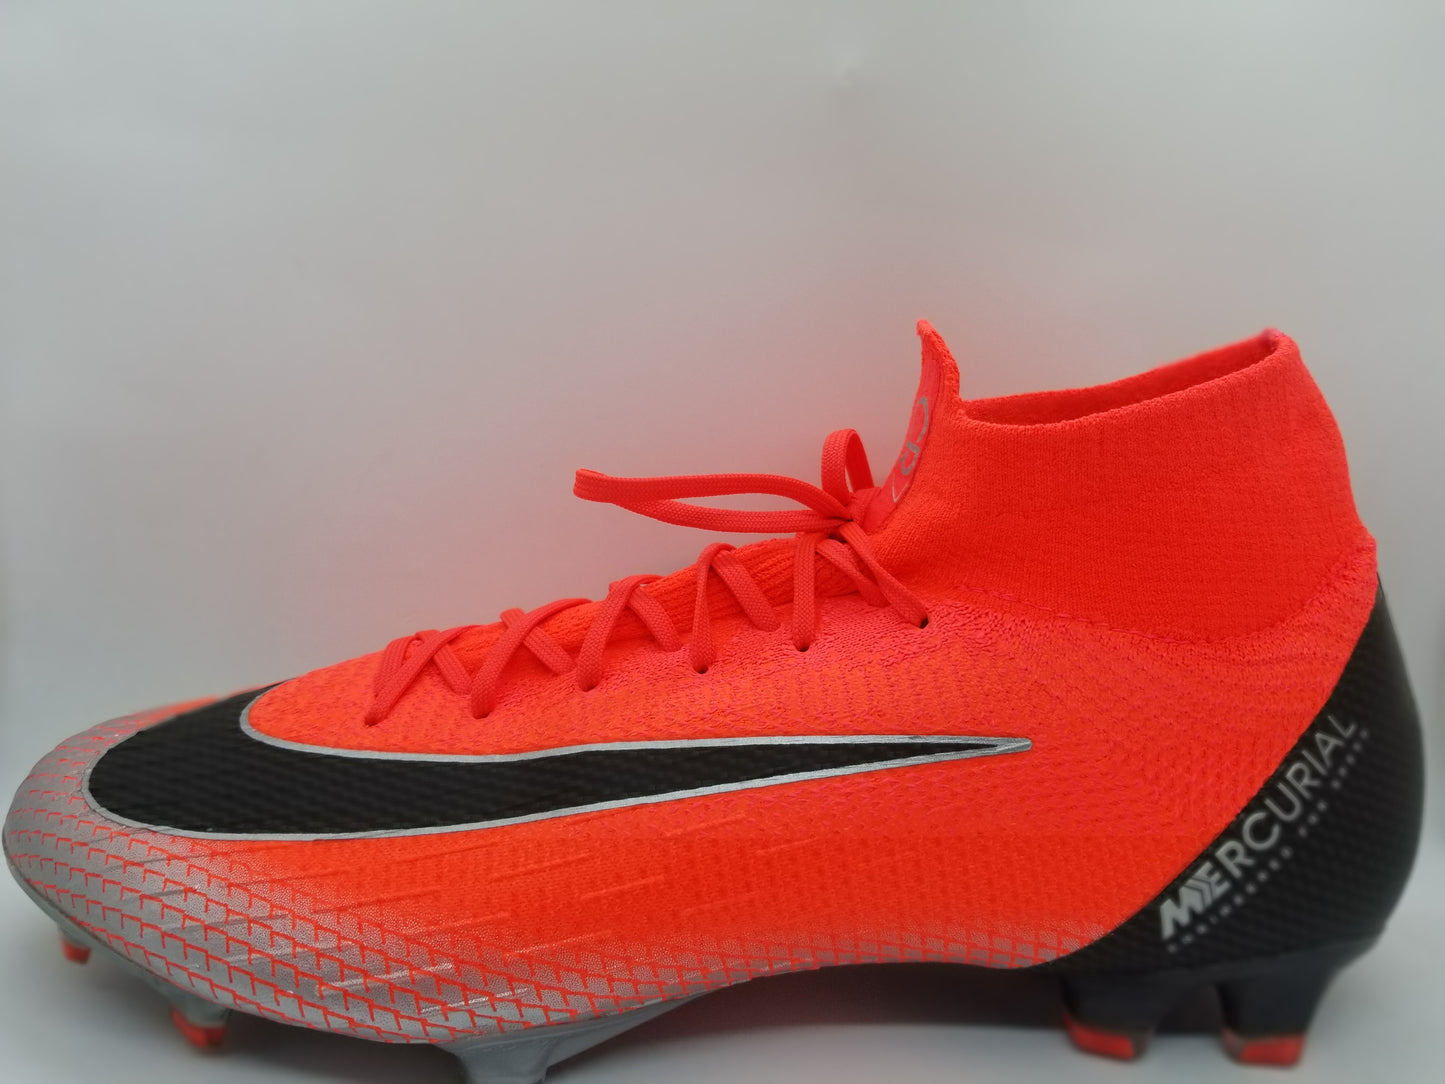 Nike Mercurial Superfly 6 Elite CR7 'Chapter 7' FG